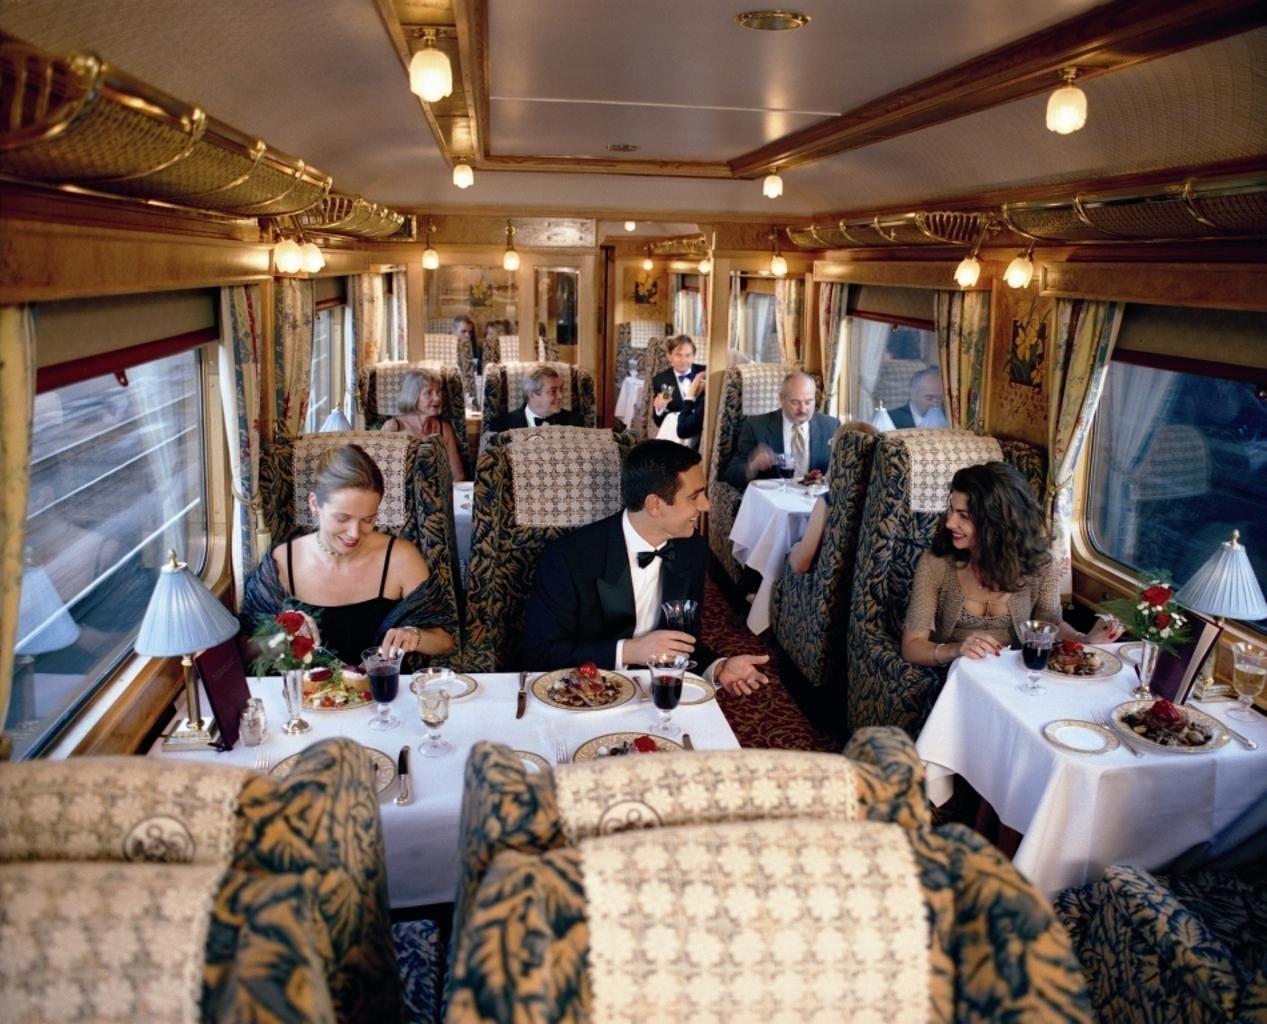 The Orient Express